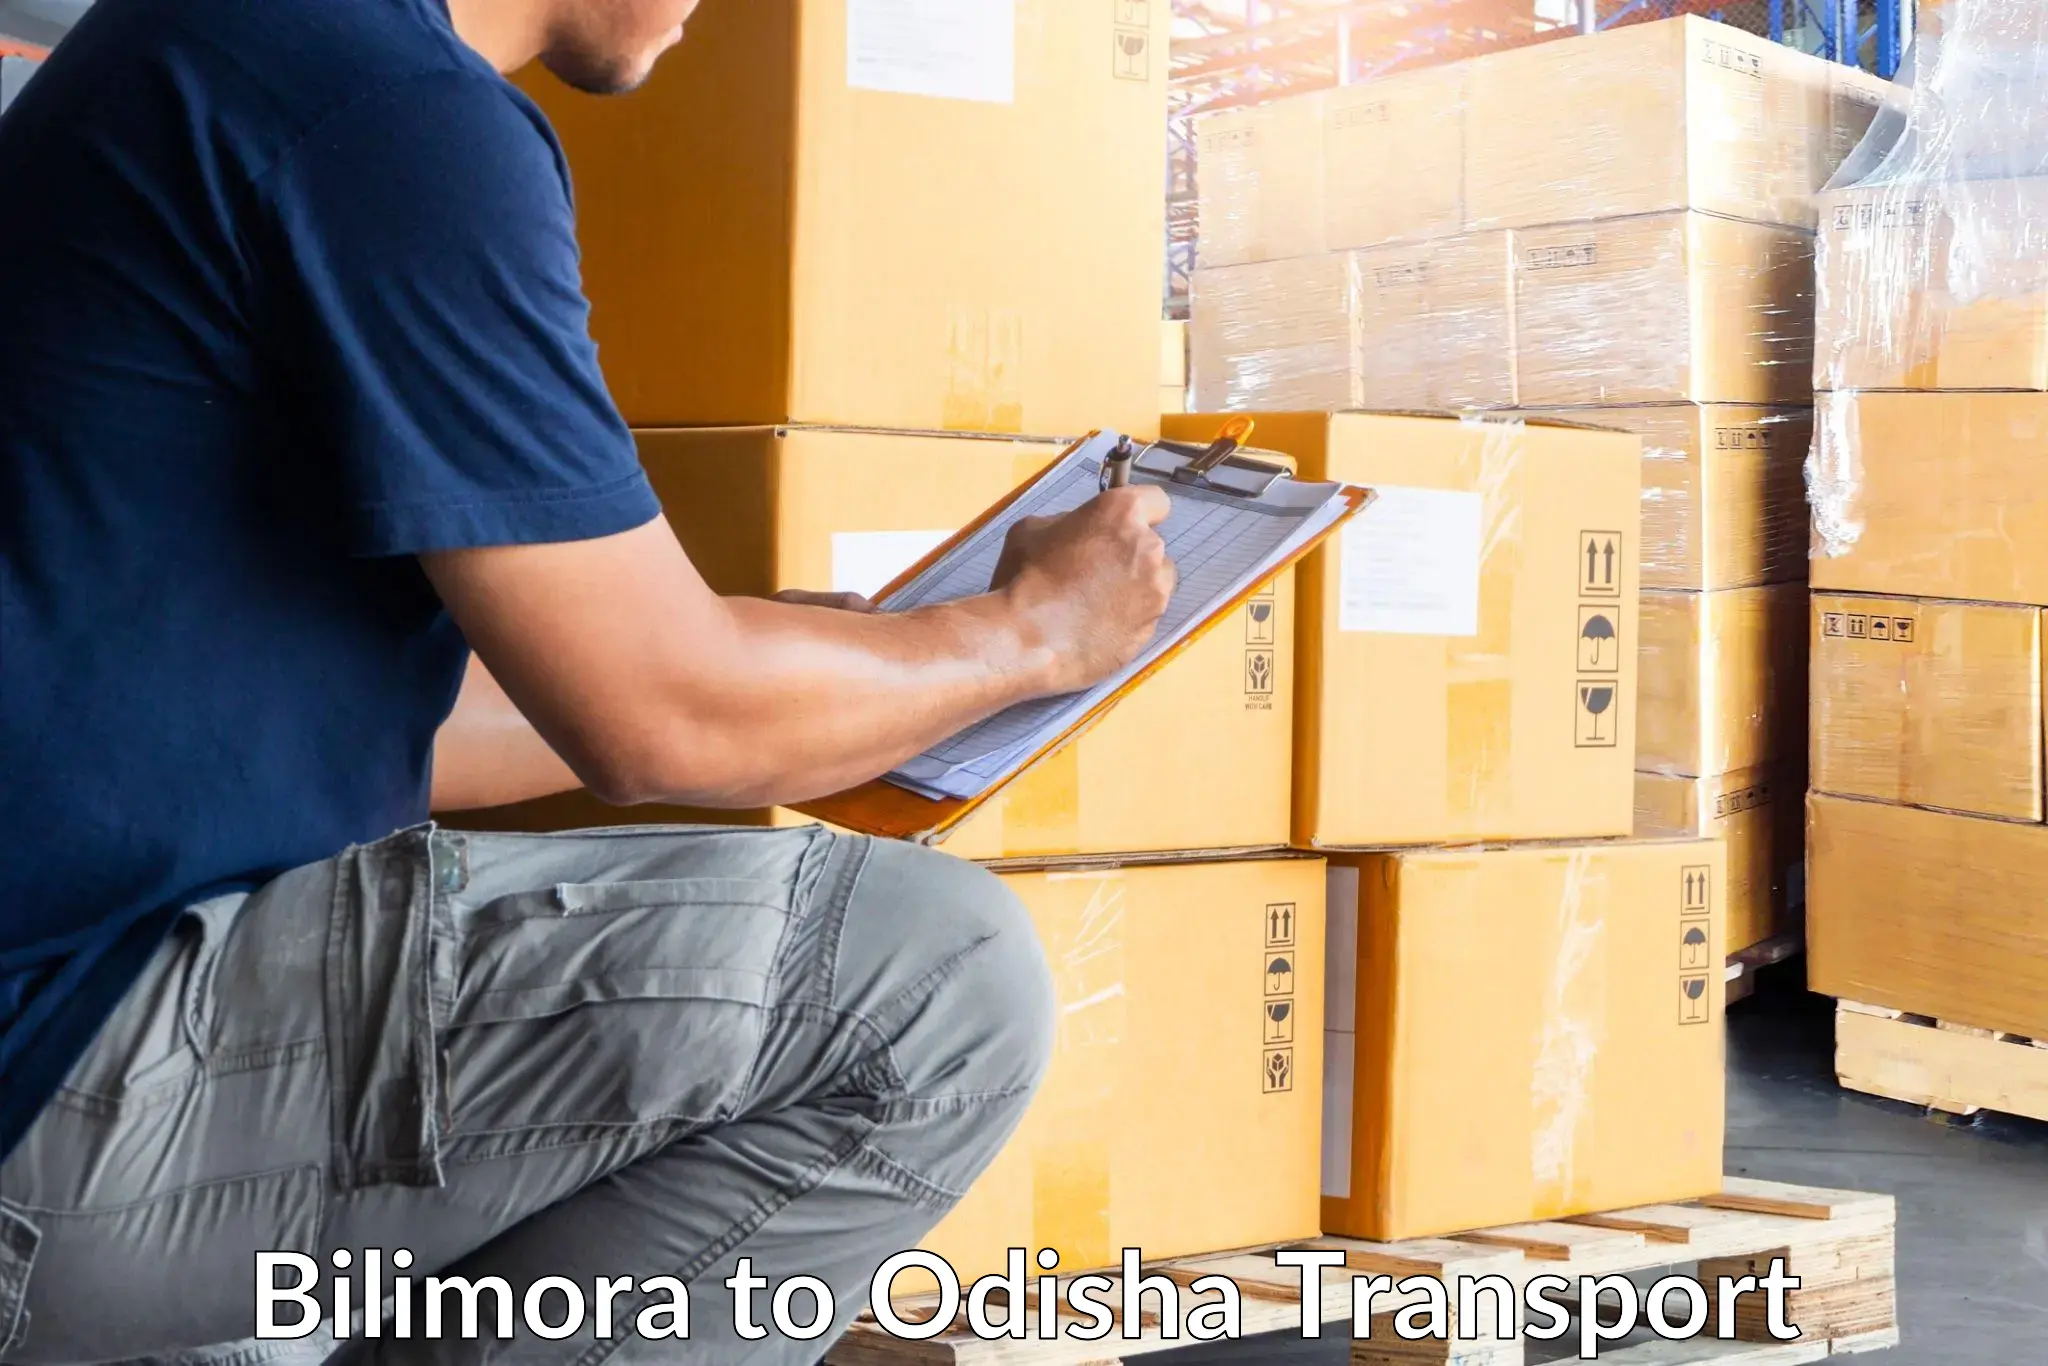 Air freight transport services Bilimora to Dandisahi